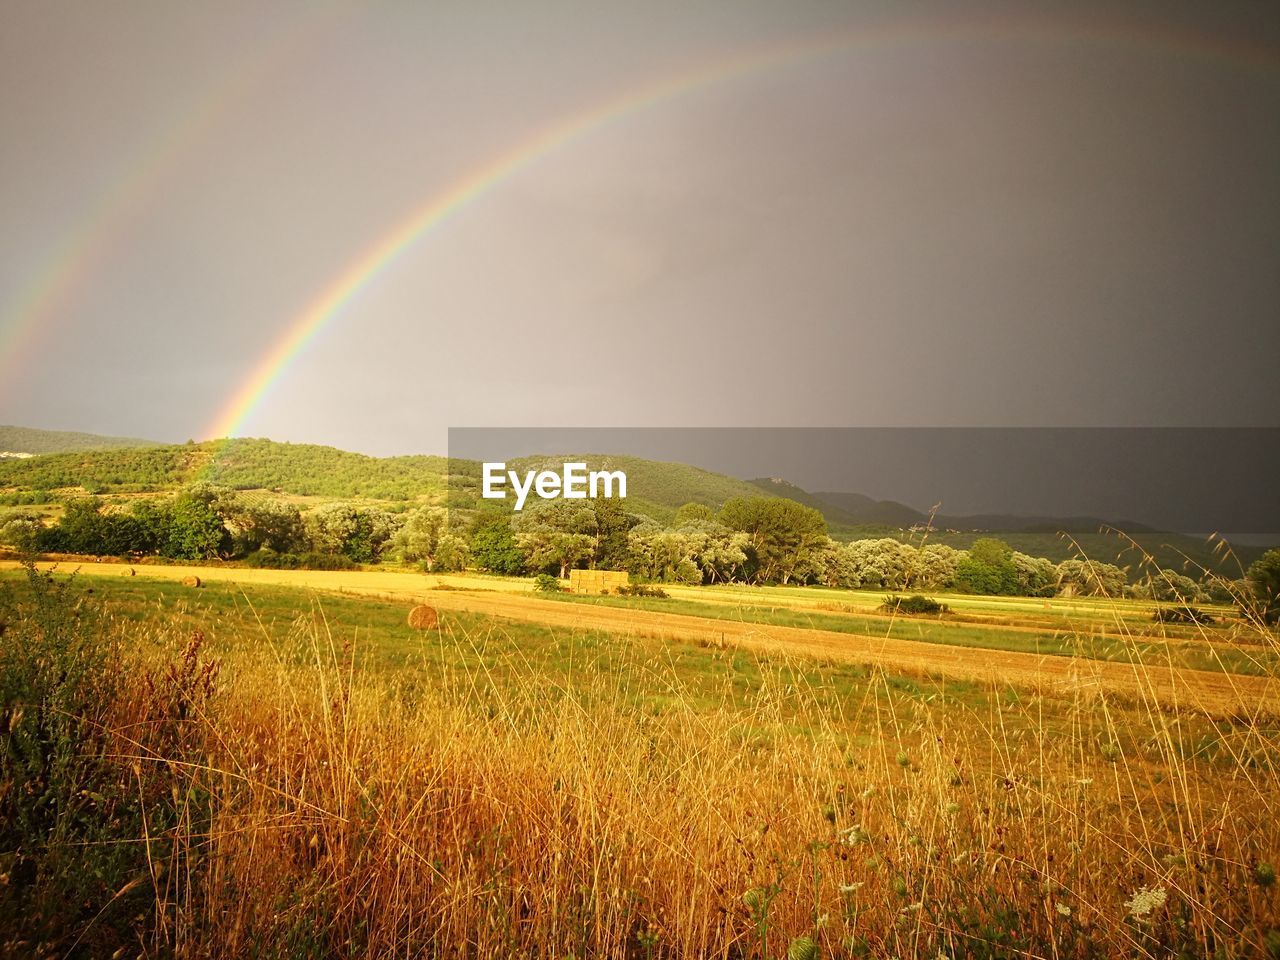 SCENIC VIEW OF RAINBOW OVER AGRICULTURAL FIELD